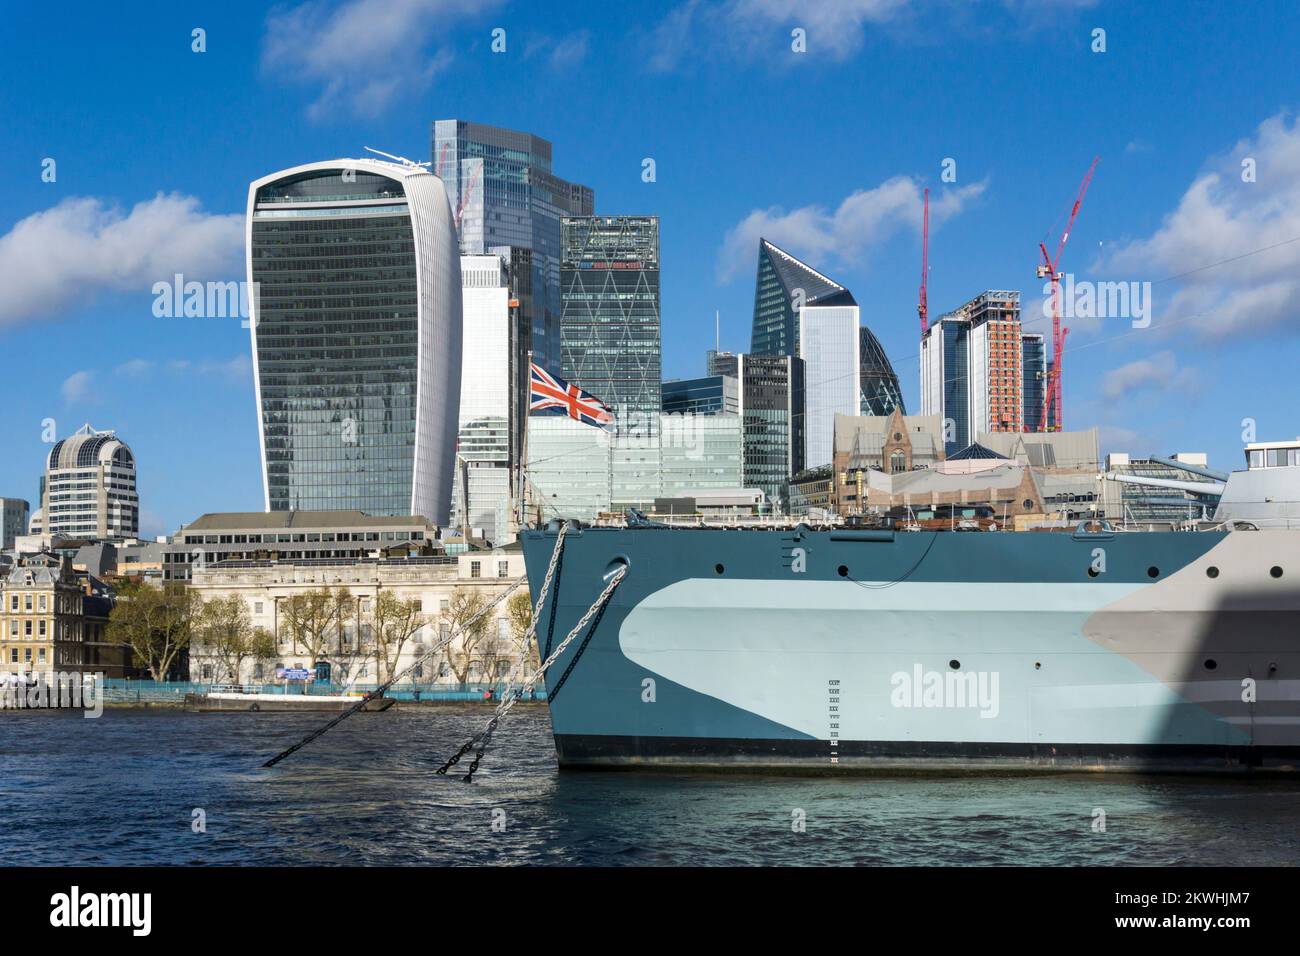 Union Jack flag on bow of HMS Belfast in front of the office blocks of the City of London. Stock Photo